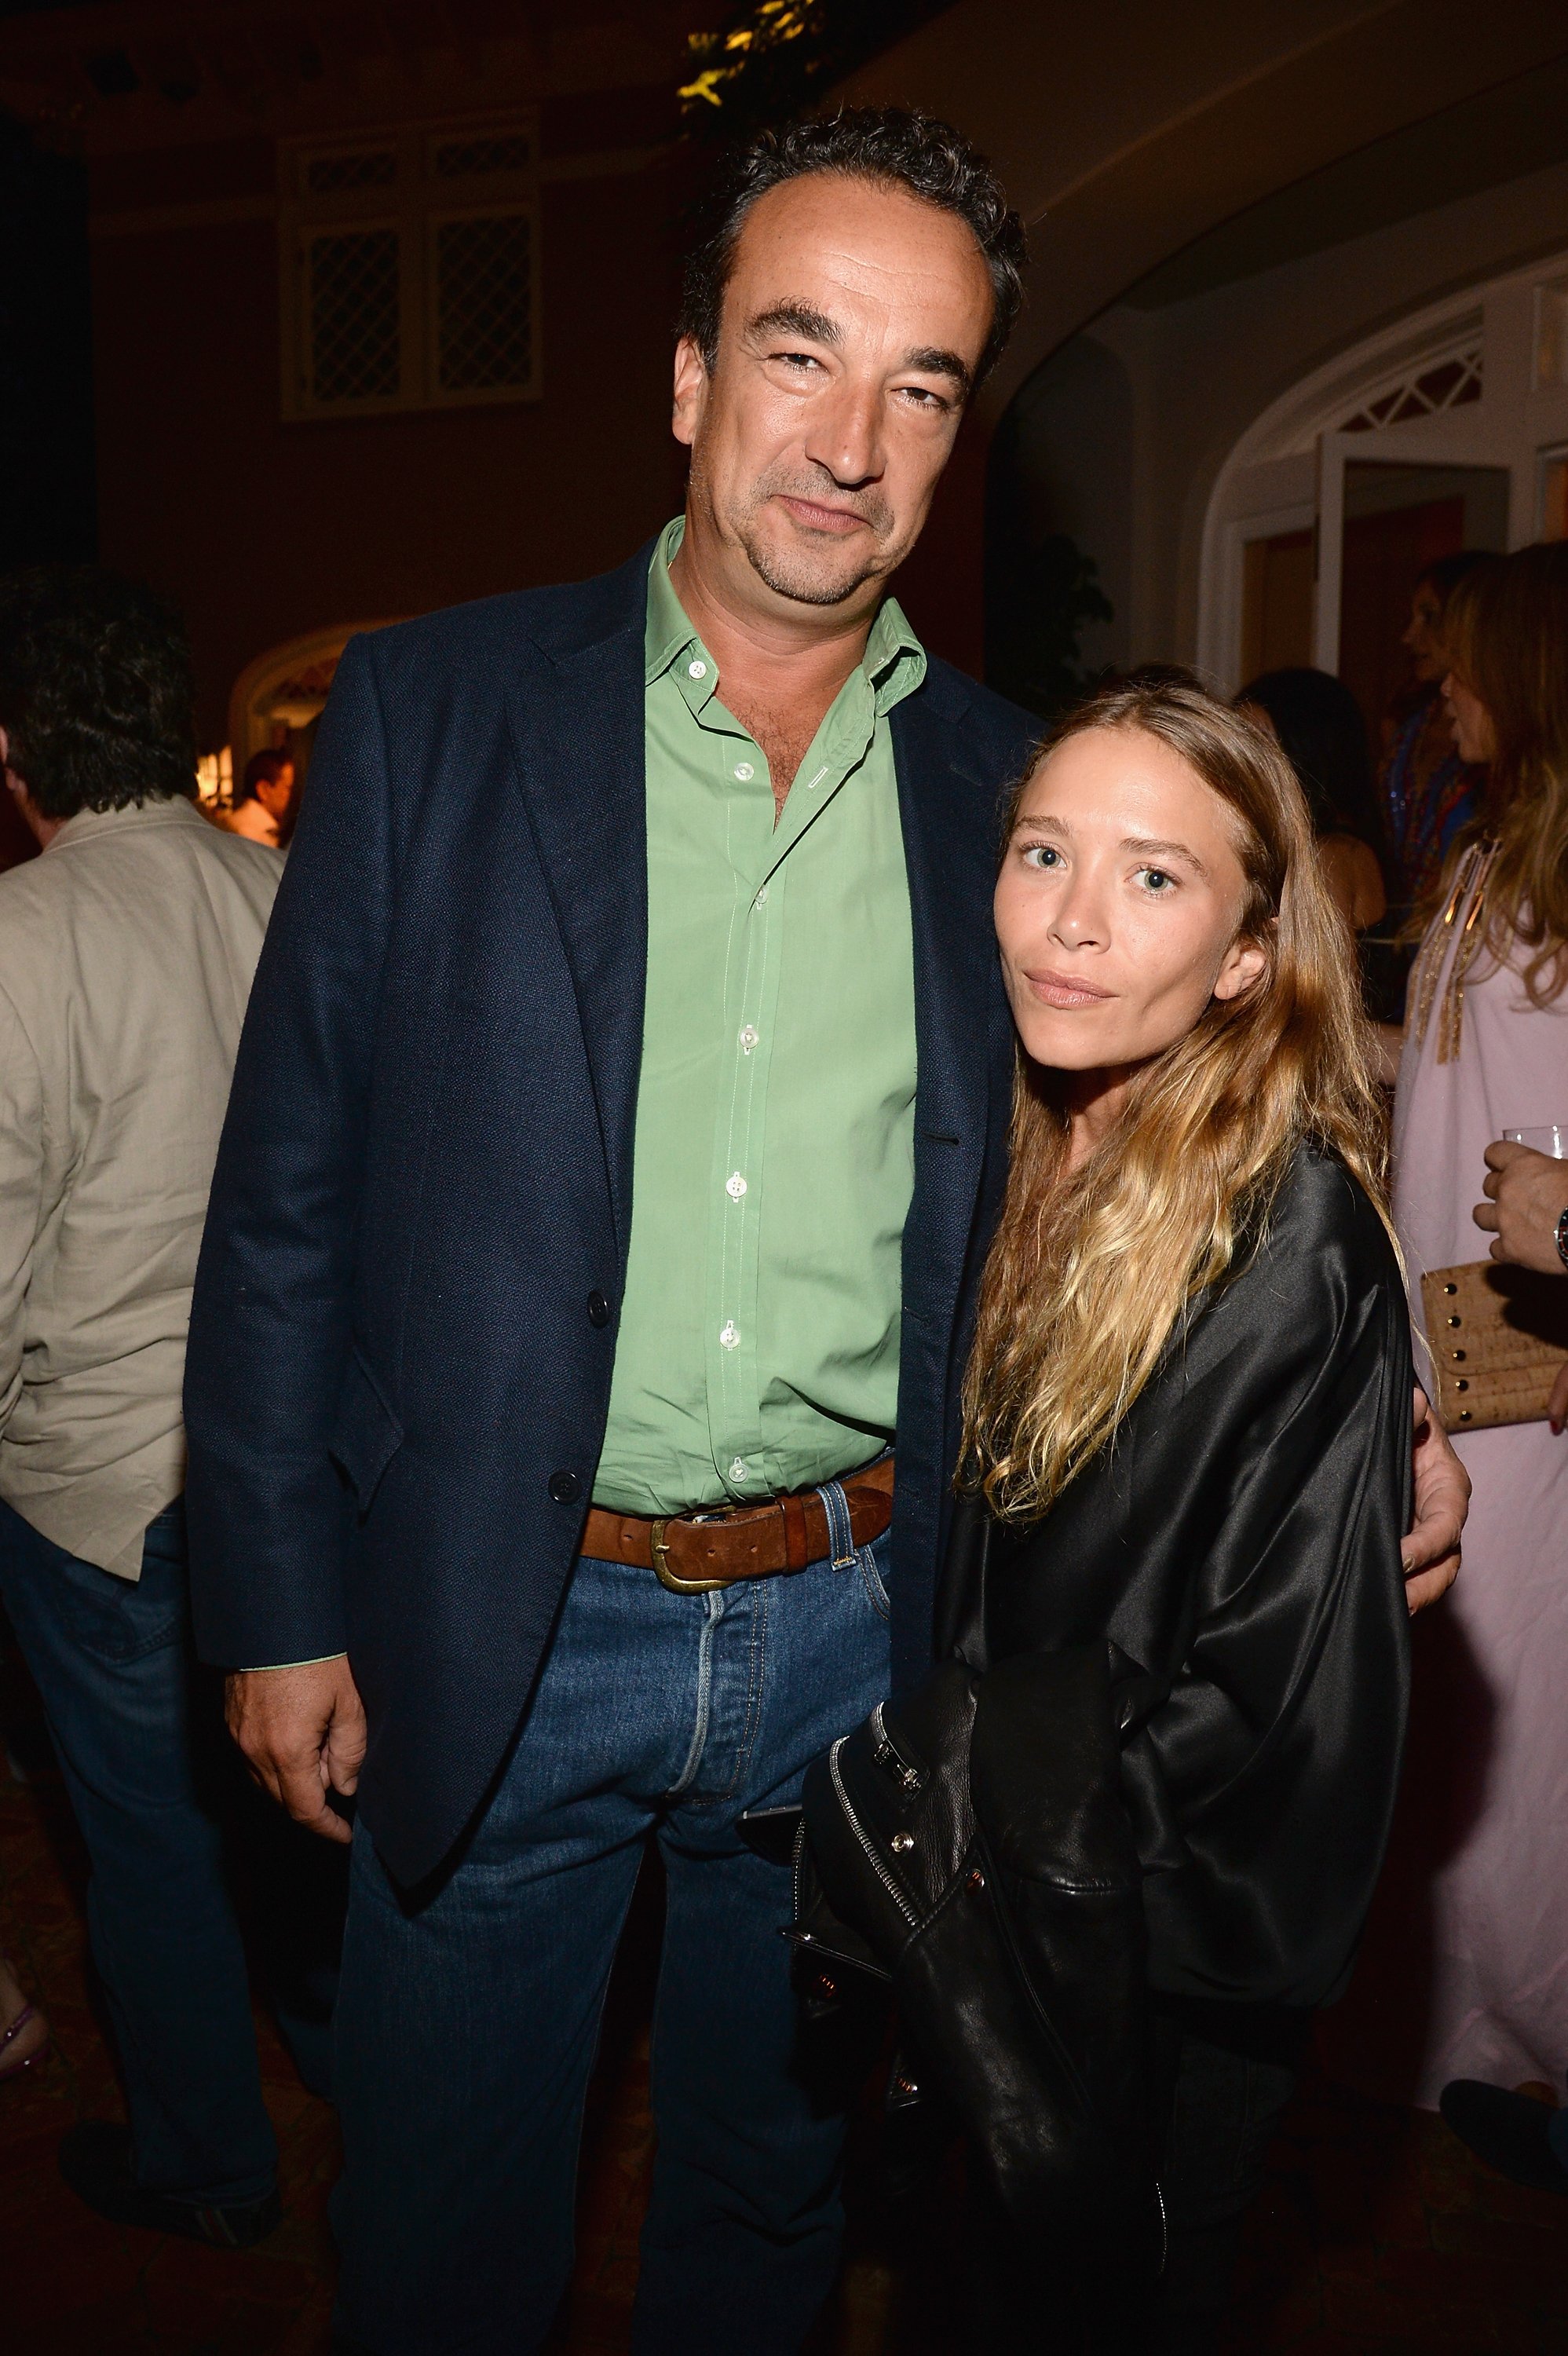 Olivier Sarkozy and Mary-Kate Olsen on August 15, 2015 in East Hampton, New York | Photo: Getty Images